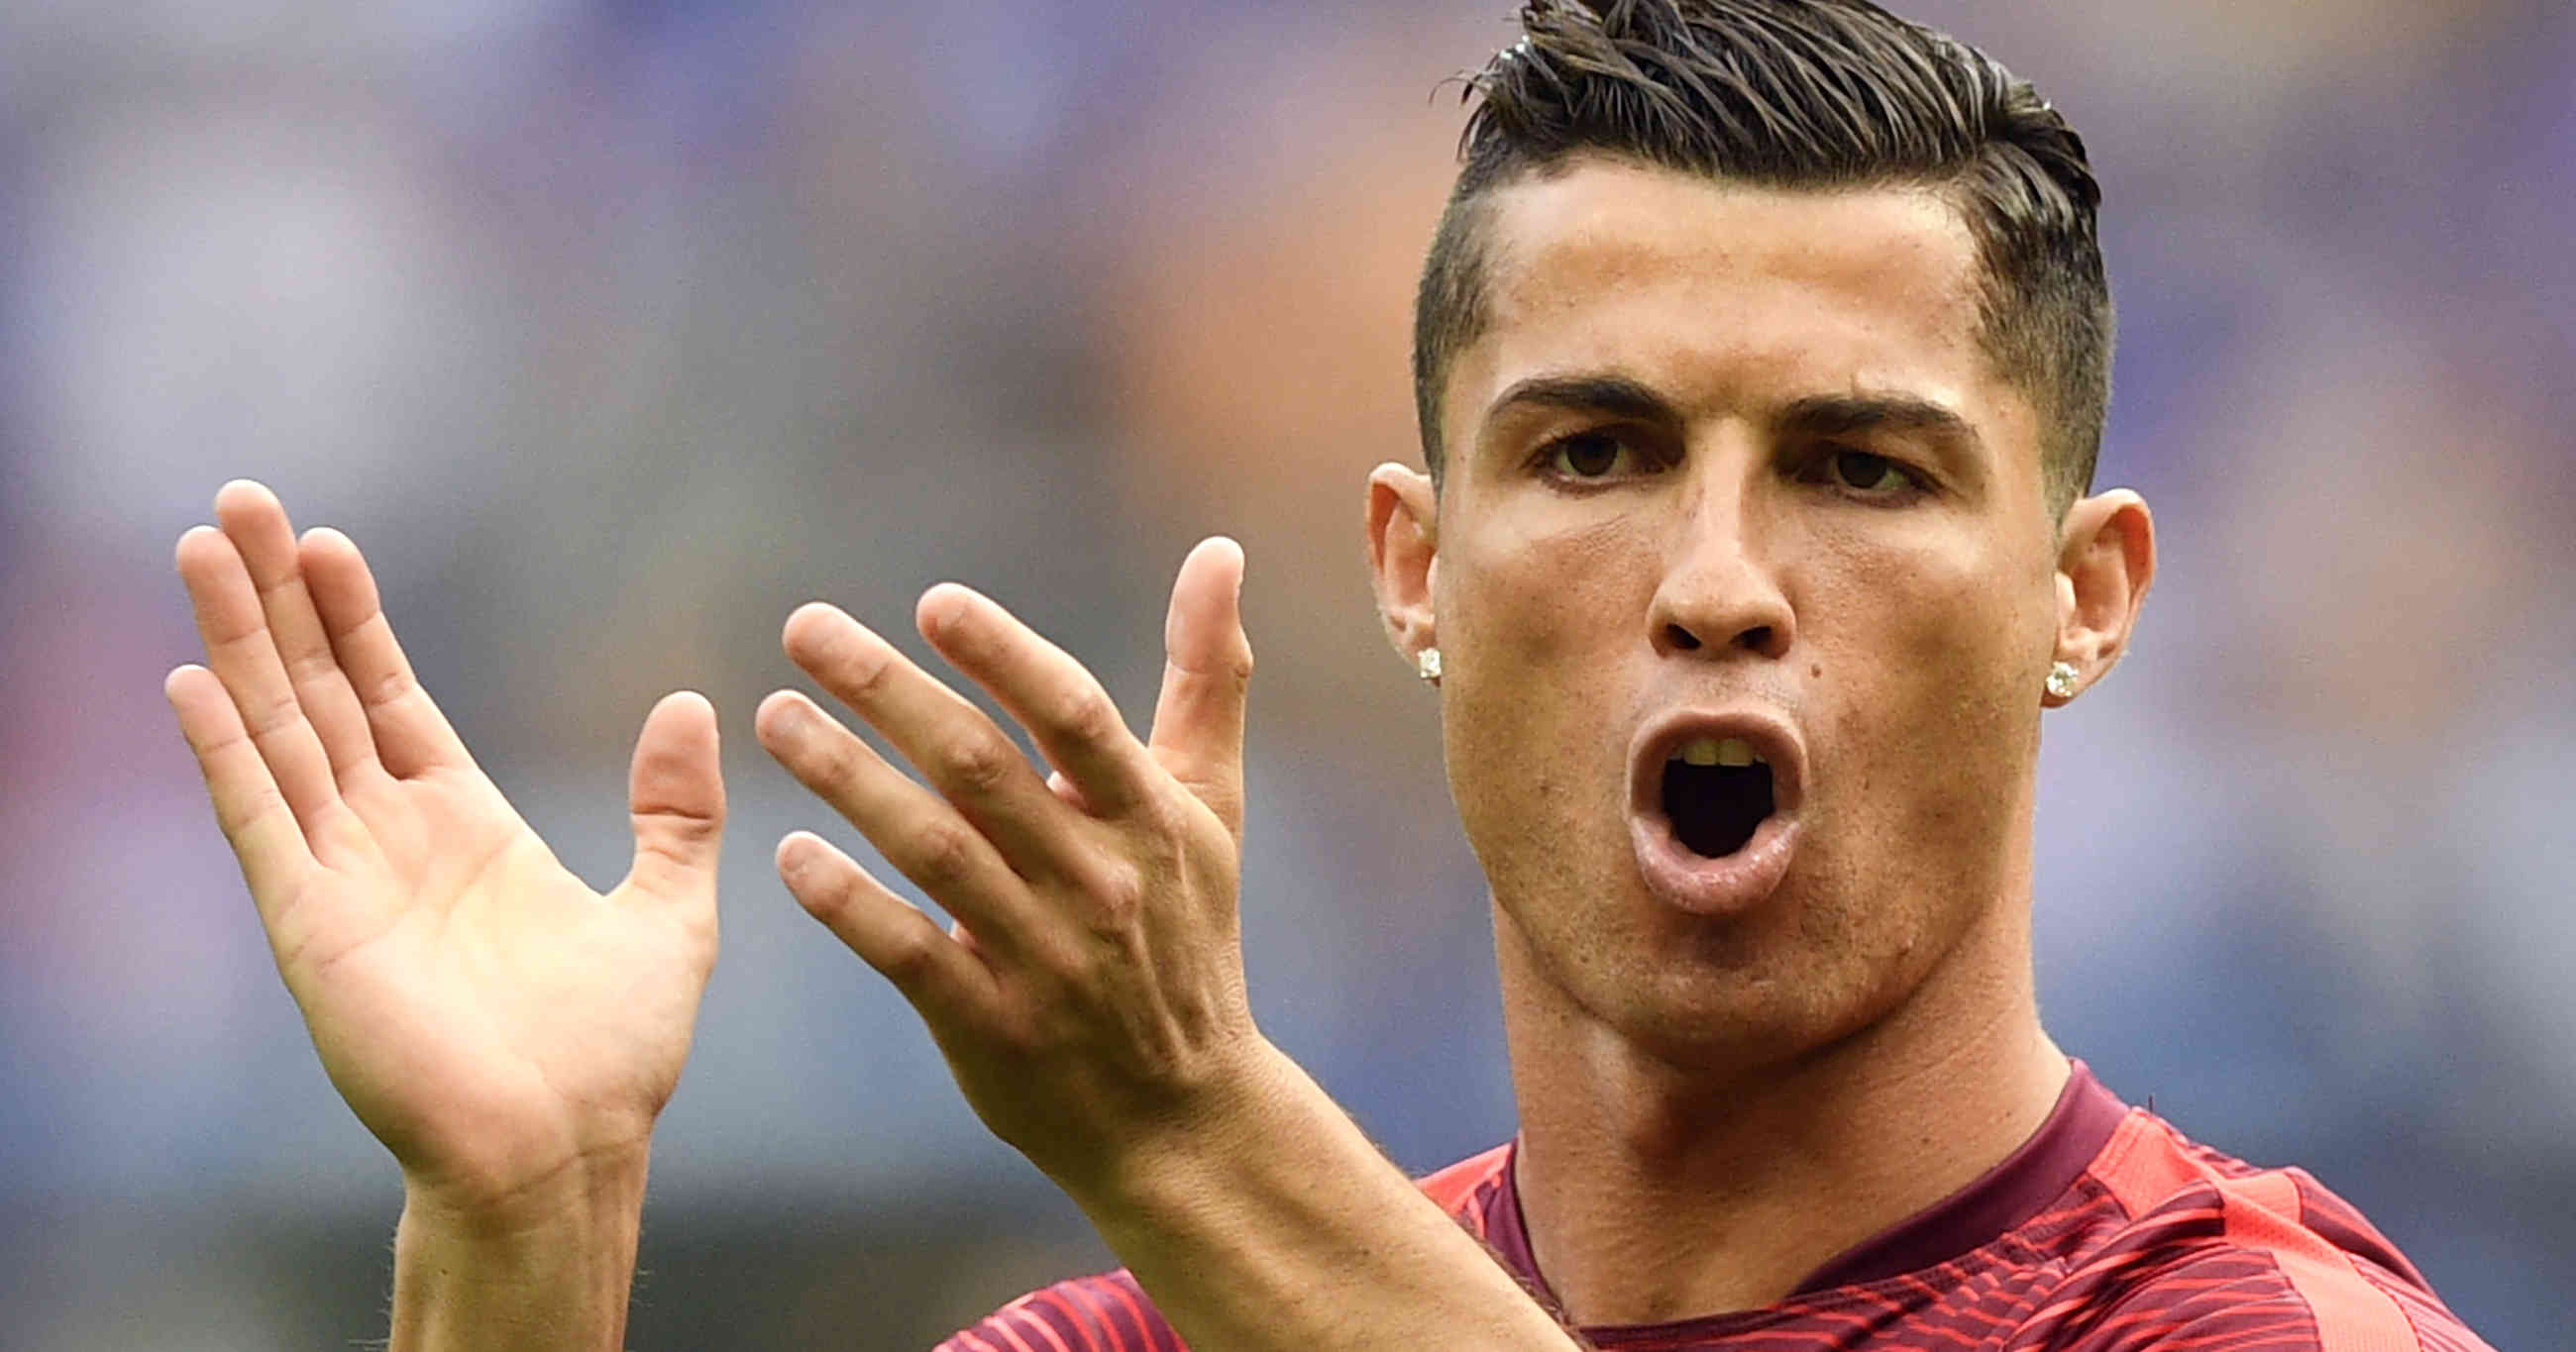 (FILES) This file photo taken on July 10, 2016 shows Portugal's forward Cristiano Ronaldo claping as he walks on the pitch prior to the start of the Euro 2016 final football match between France and Portugal at the Stade de France in Saint-Denis, north of Paris. Cristiano Ronaldo won his fourth Ballon d'Or on December 12, 2016. / AFP PHOTO / MARTIN BUREAU